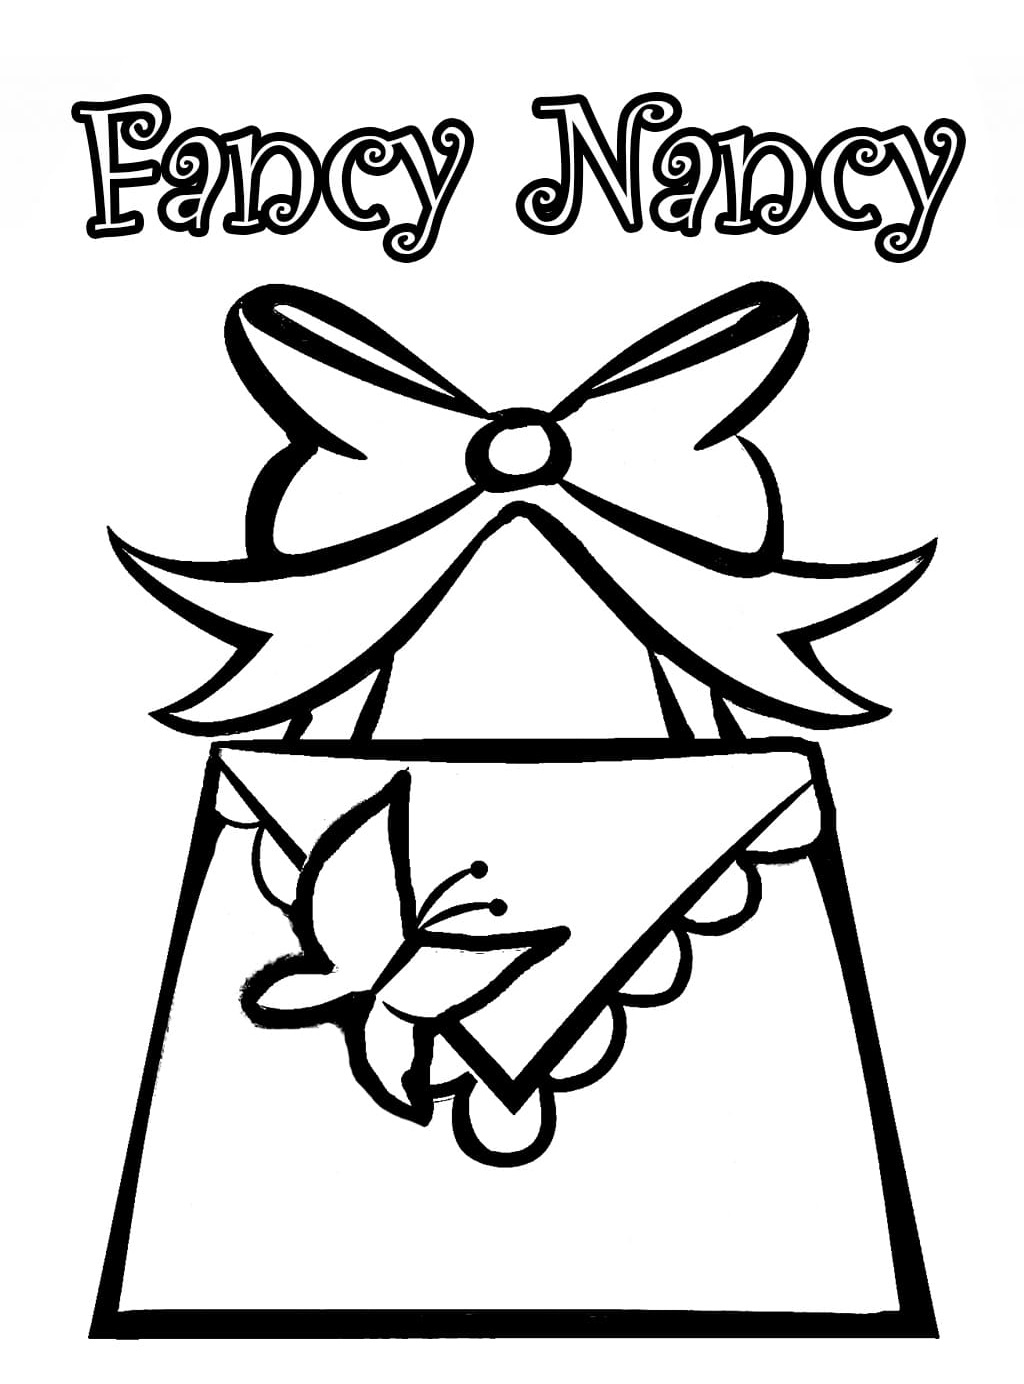 coloring pages for fancy nancy